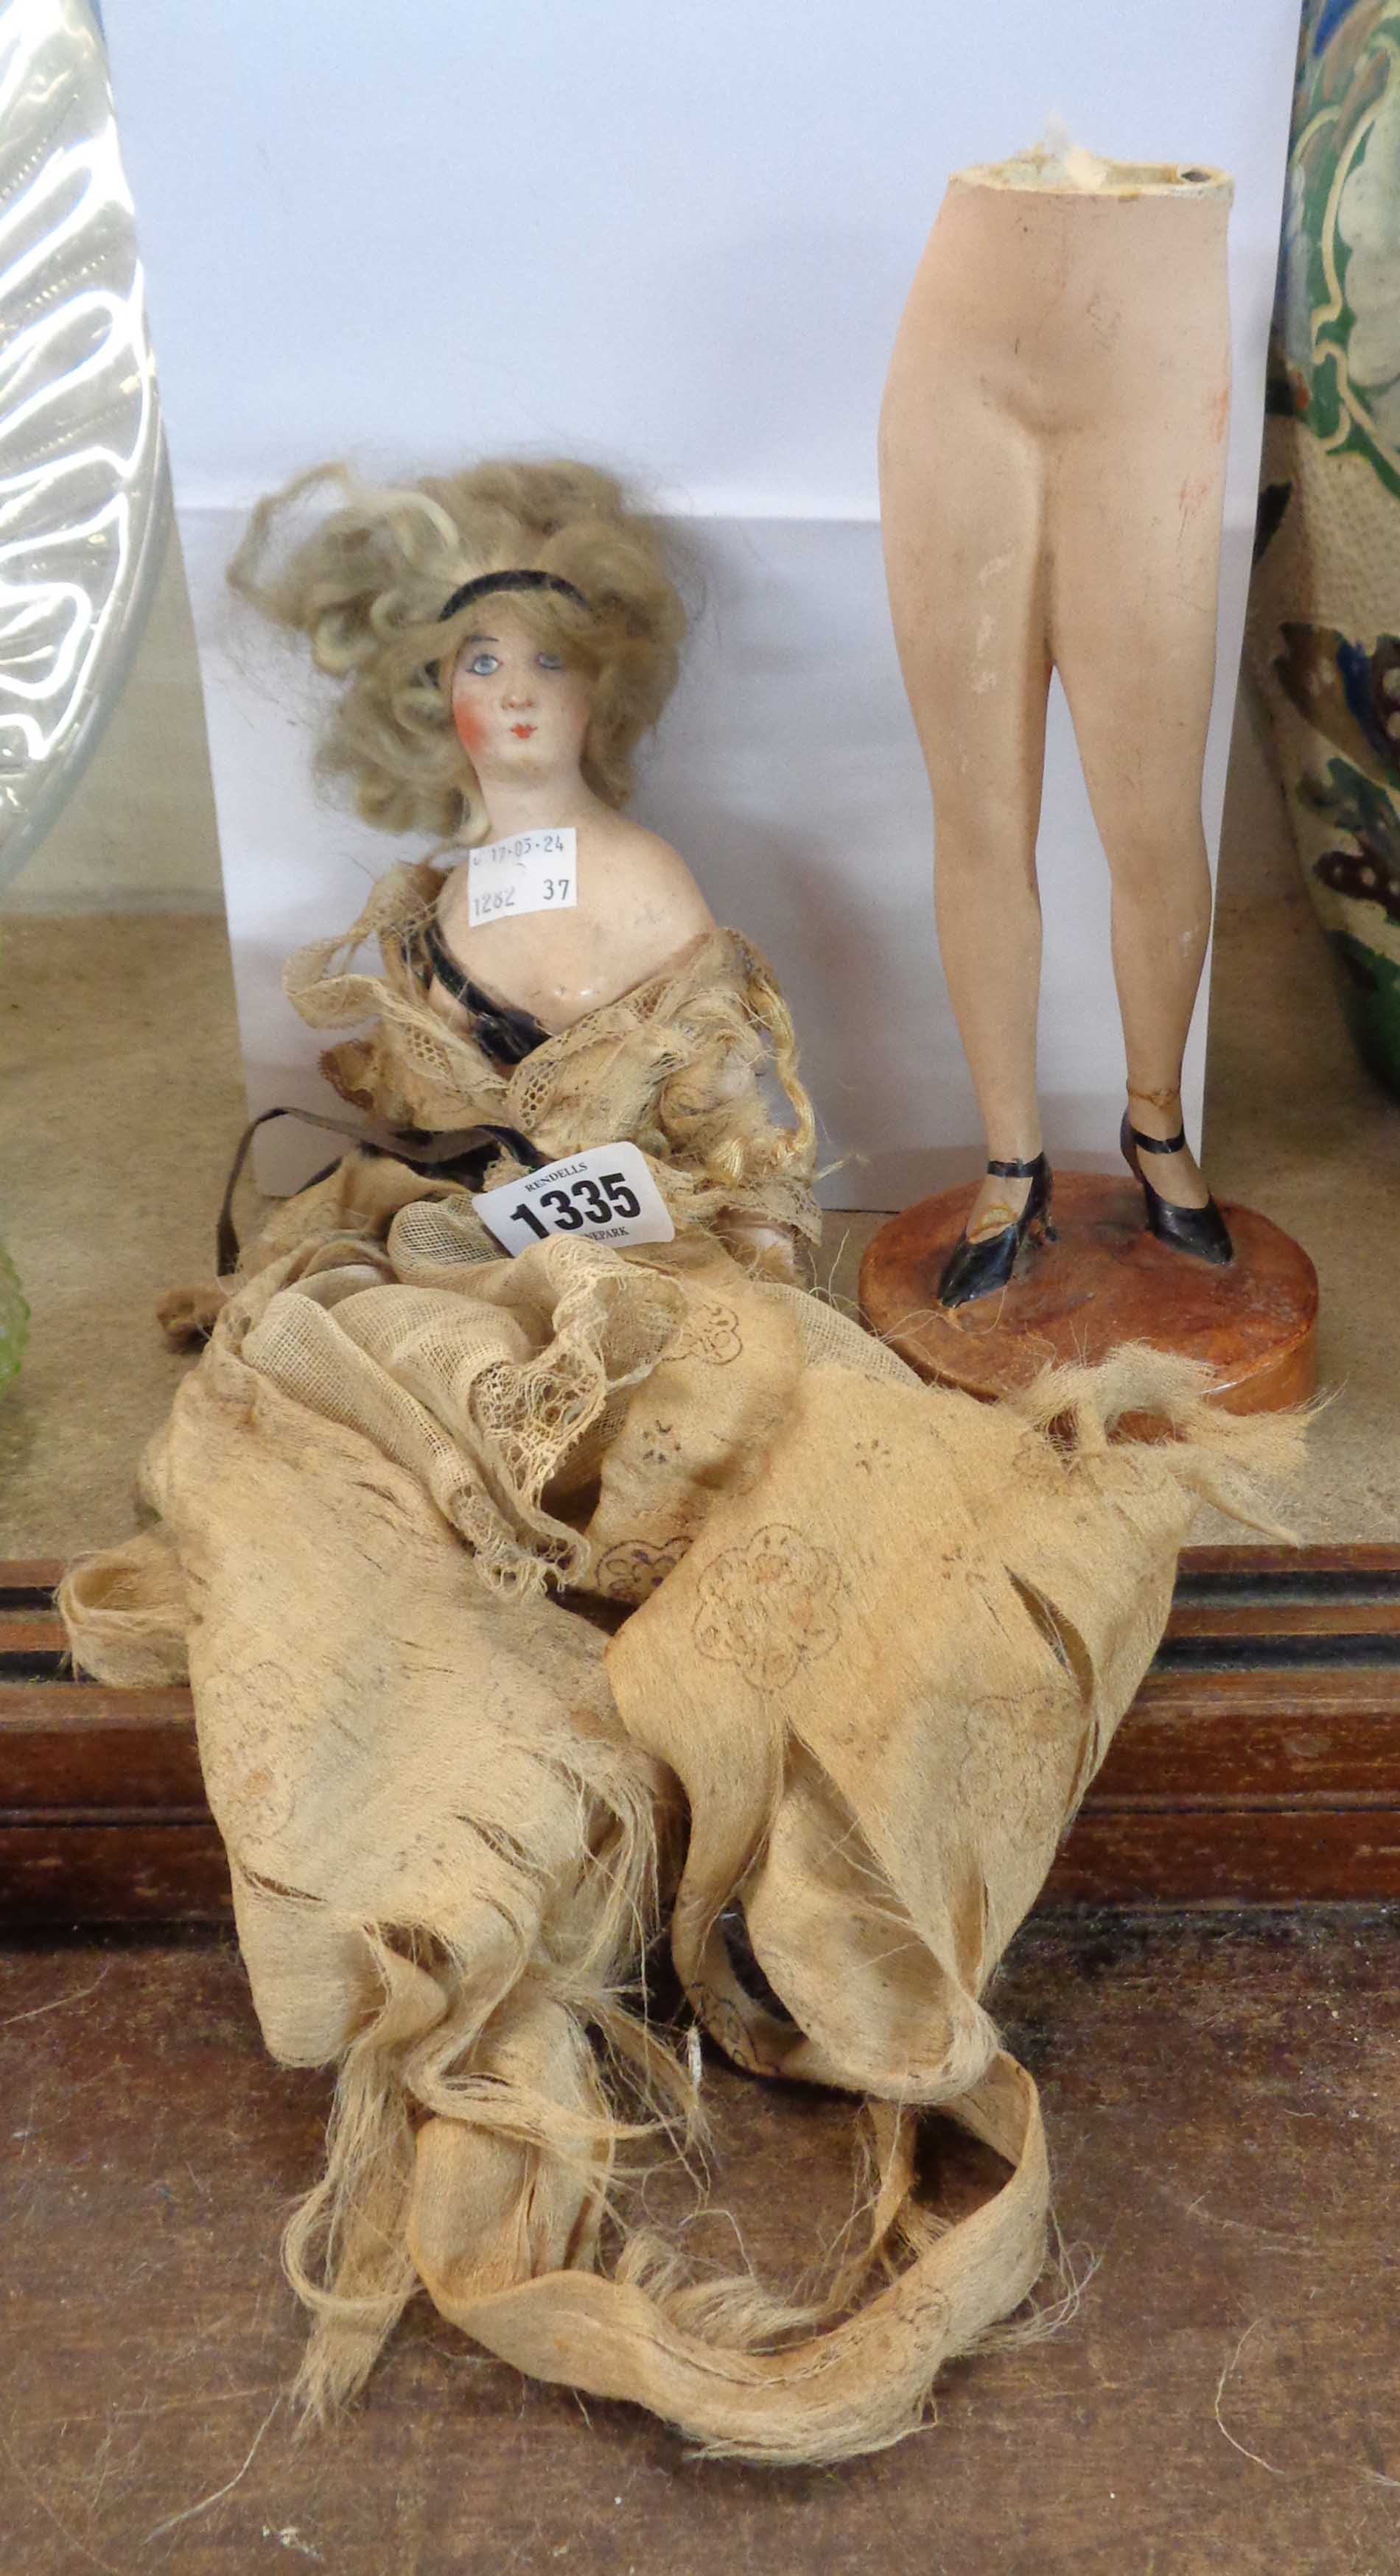 A 1920's French composition doll with remains of original clothing, hair and a painted face -